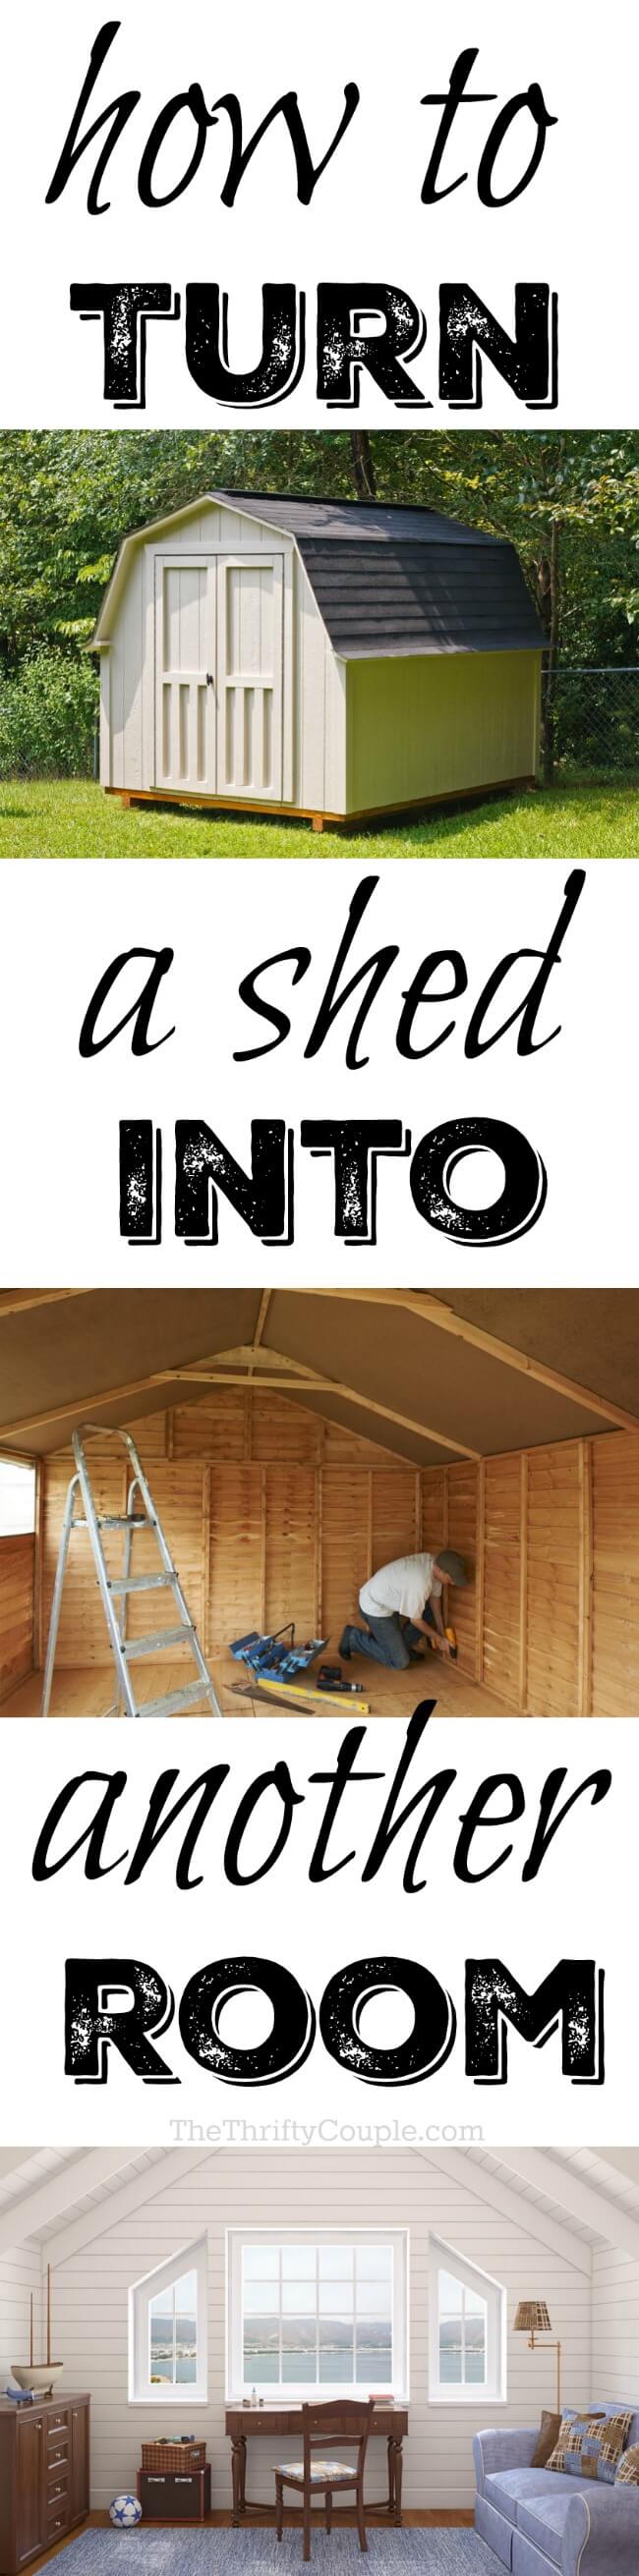 turn shed into another room